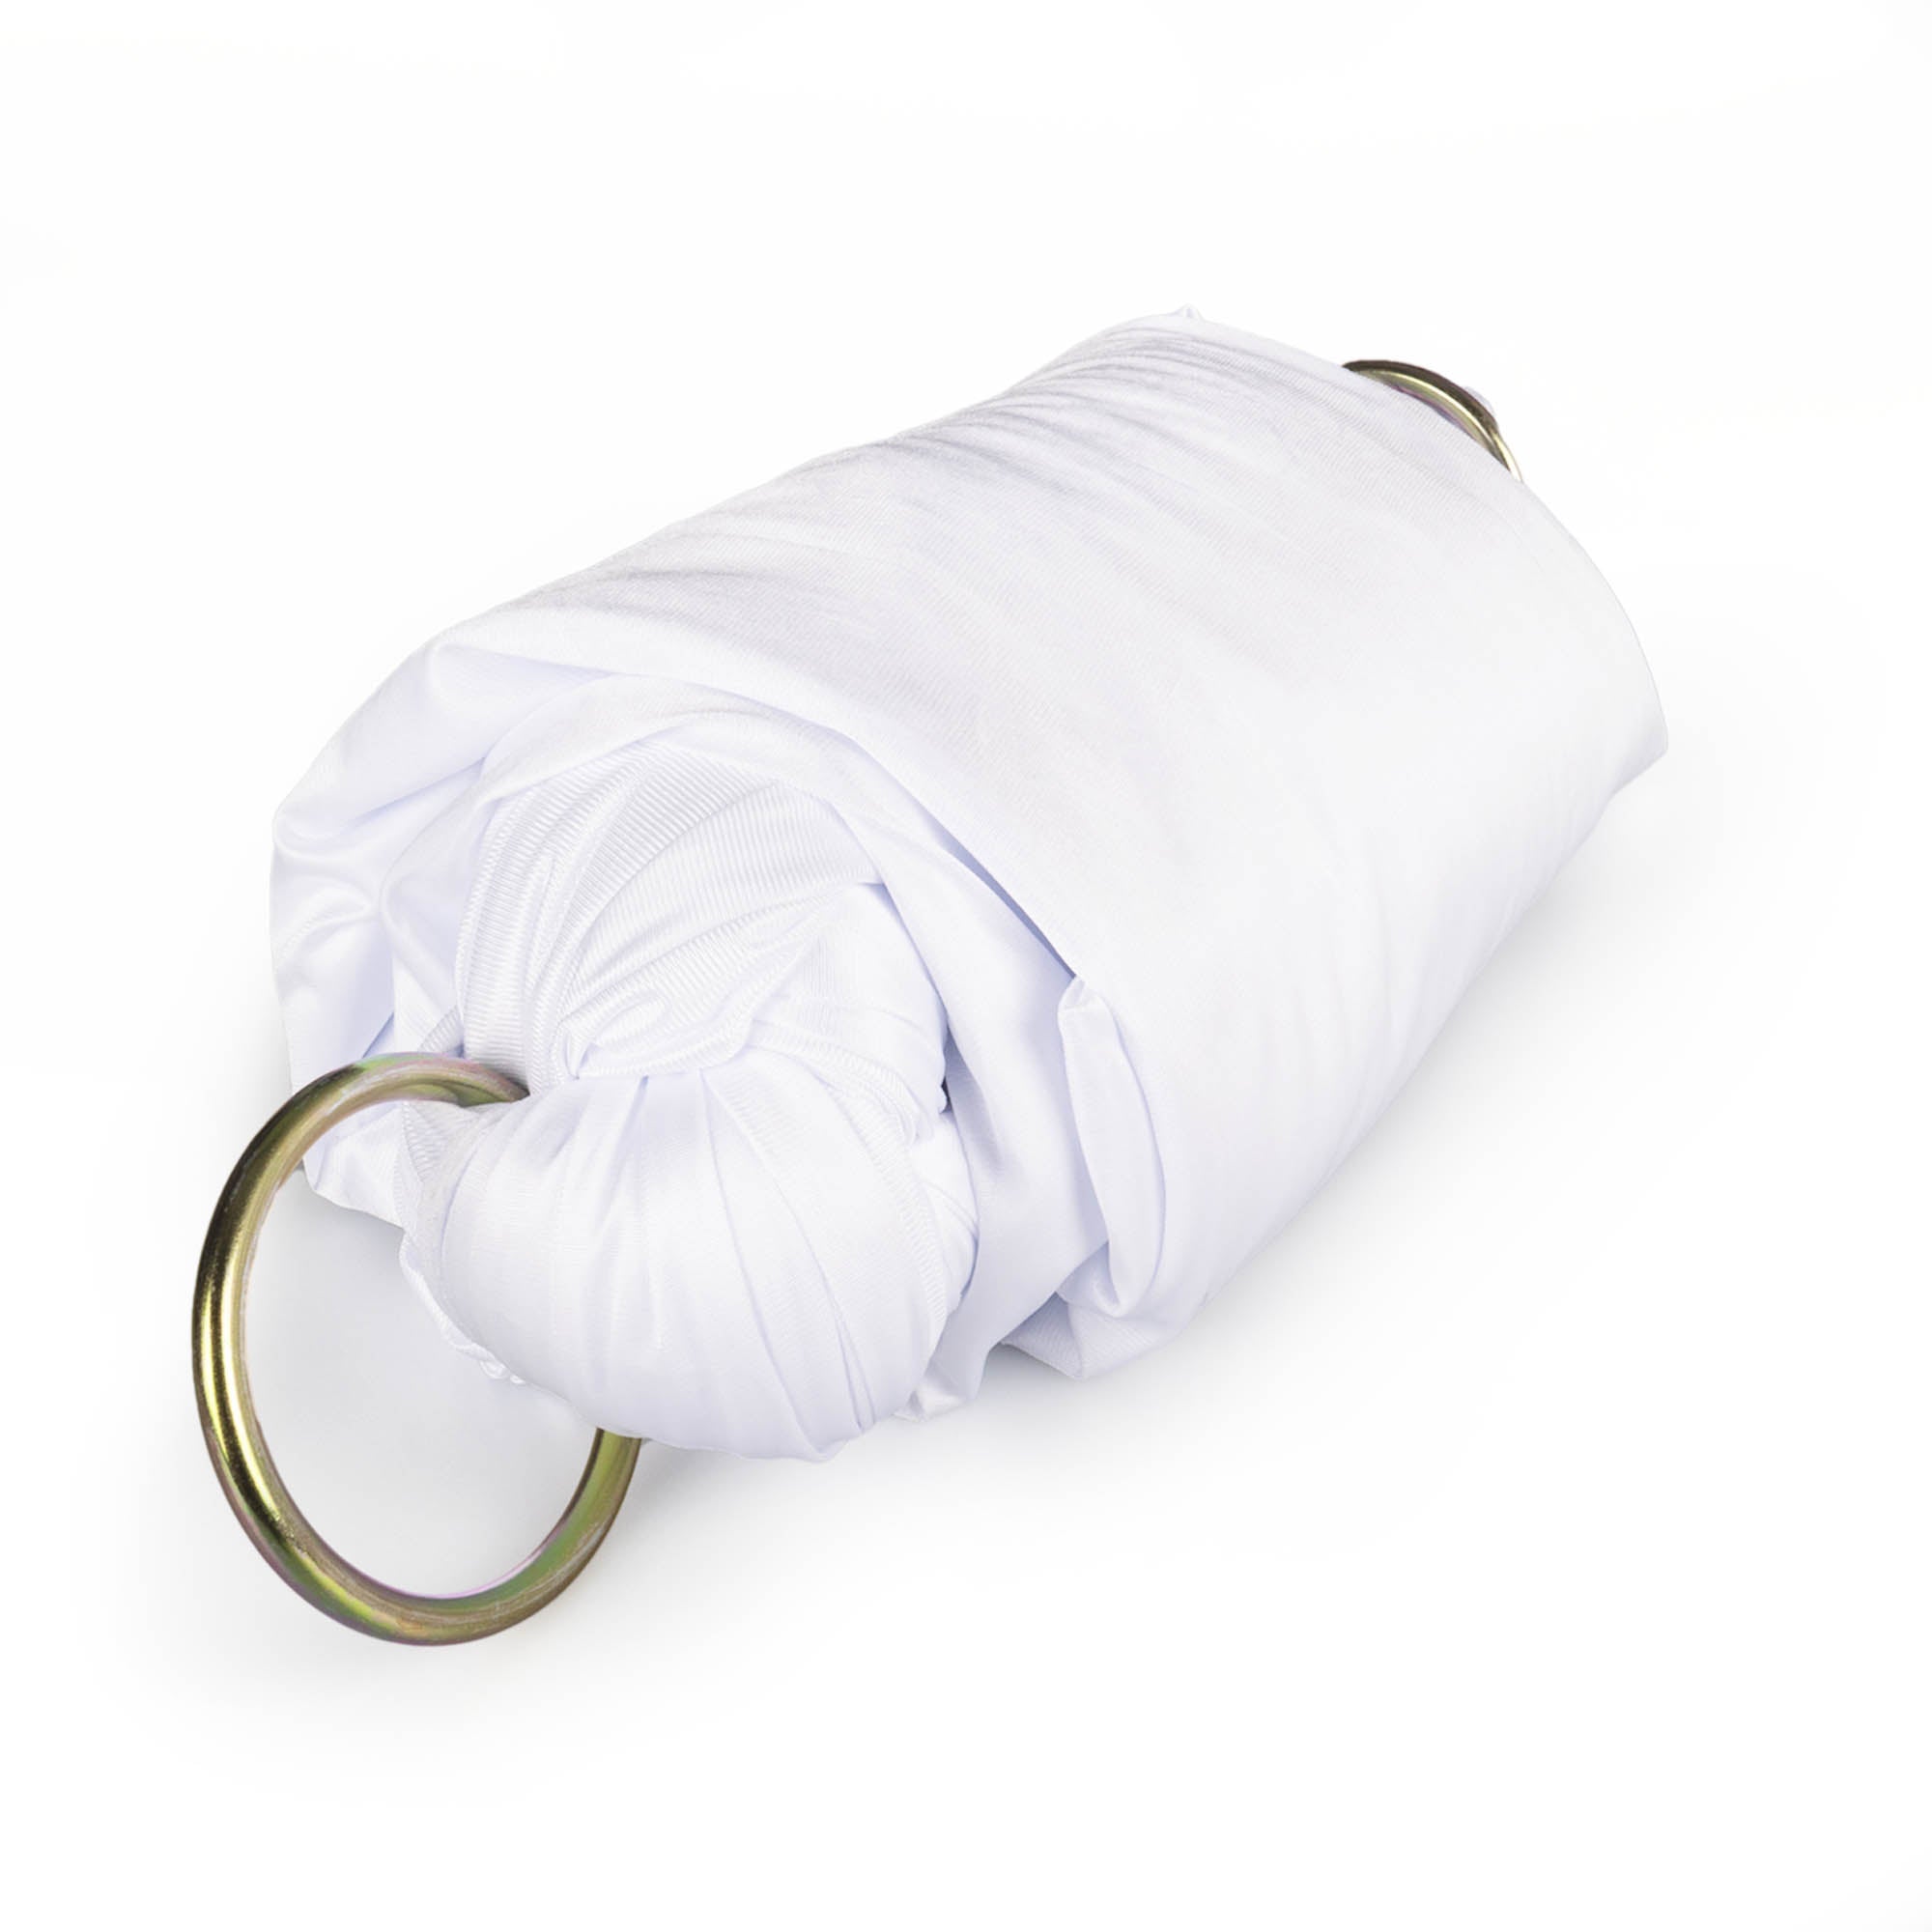 White yoga hammock rolled up with ring attached